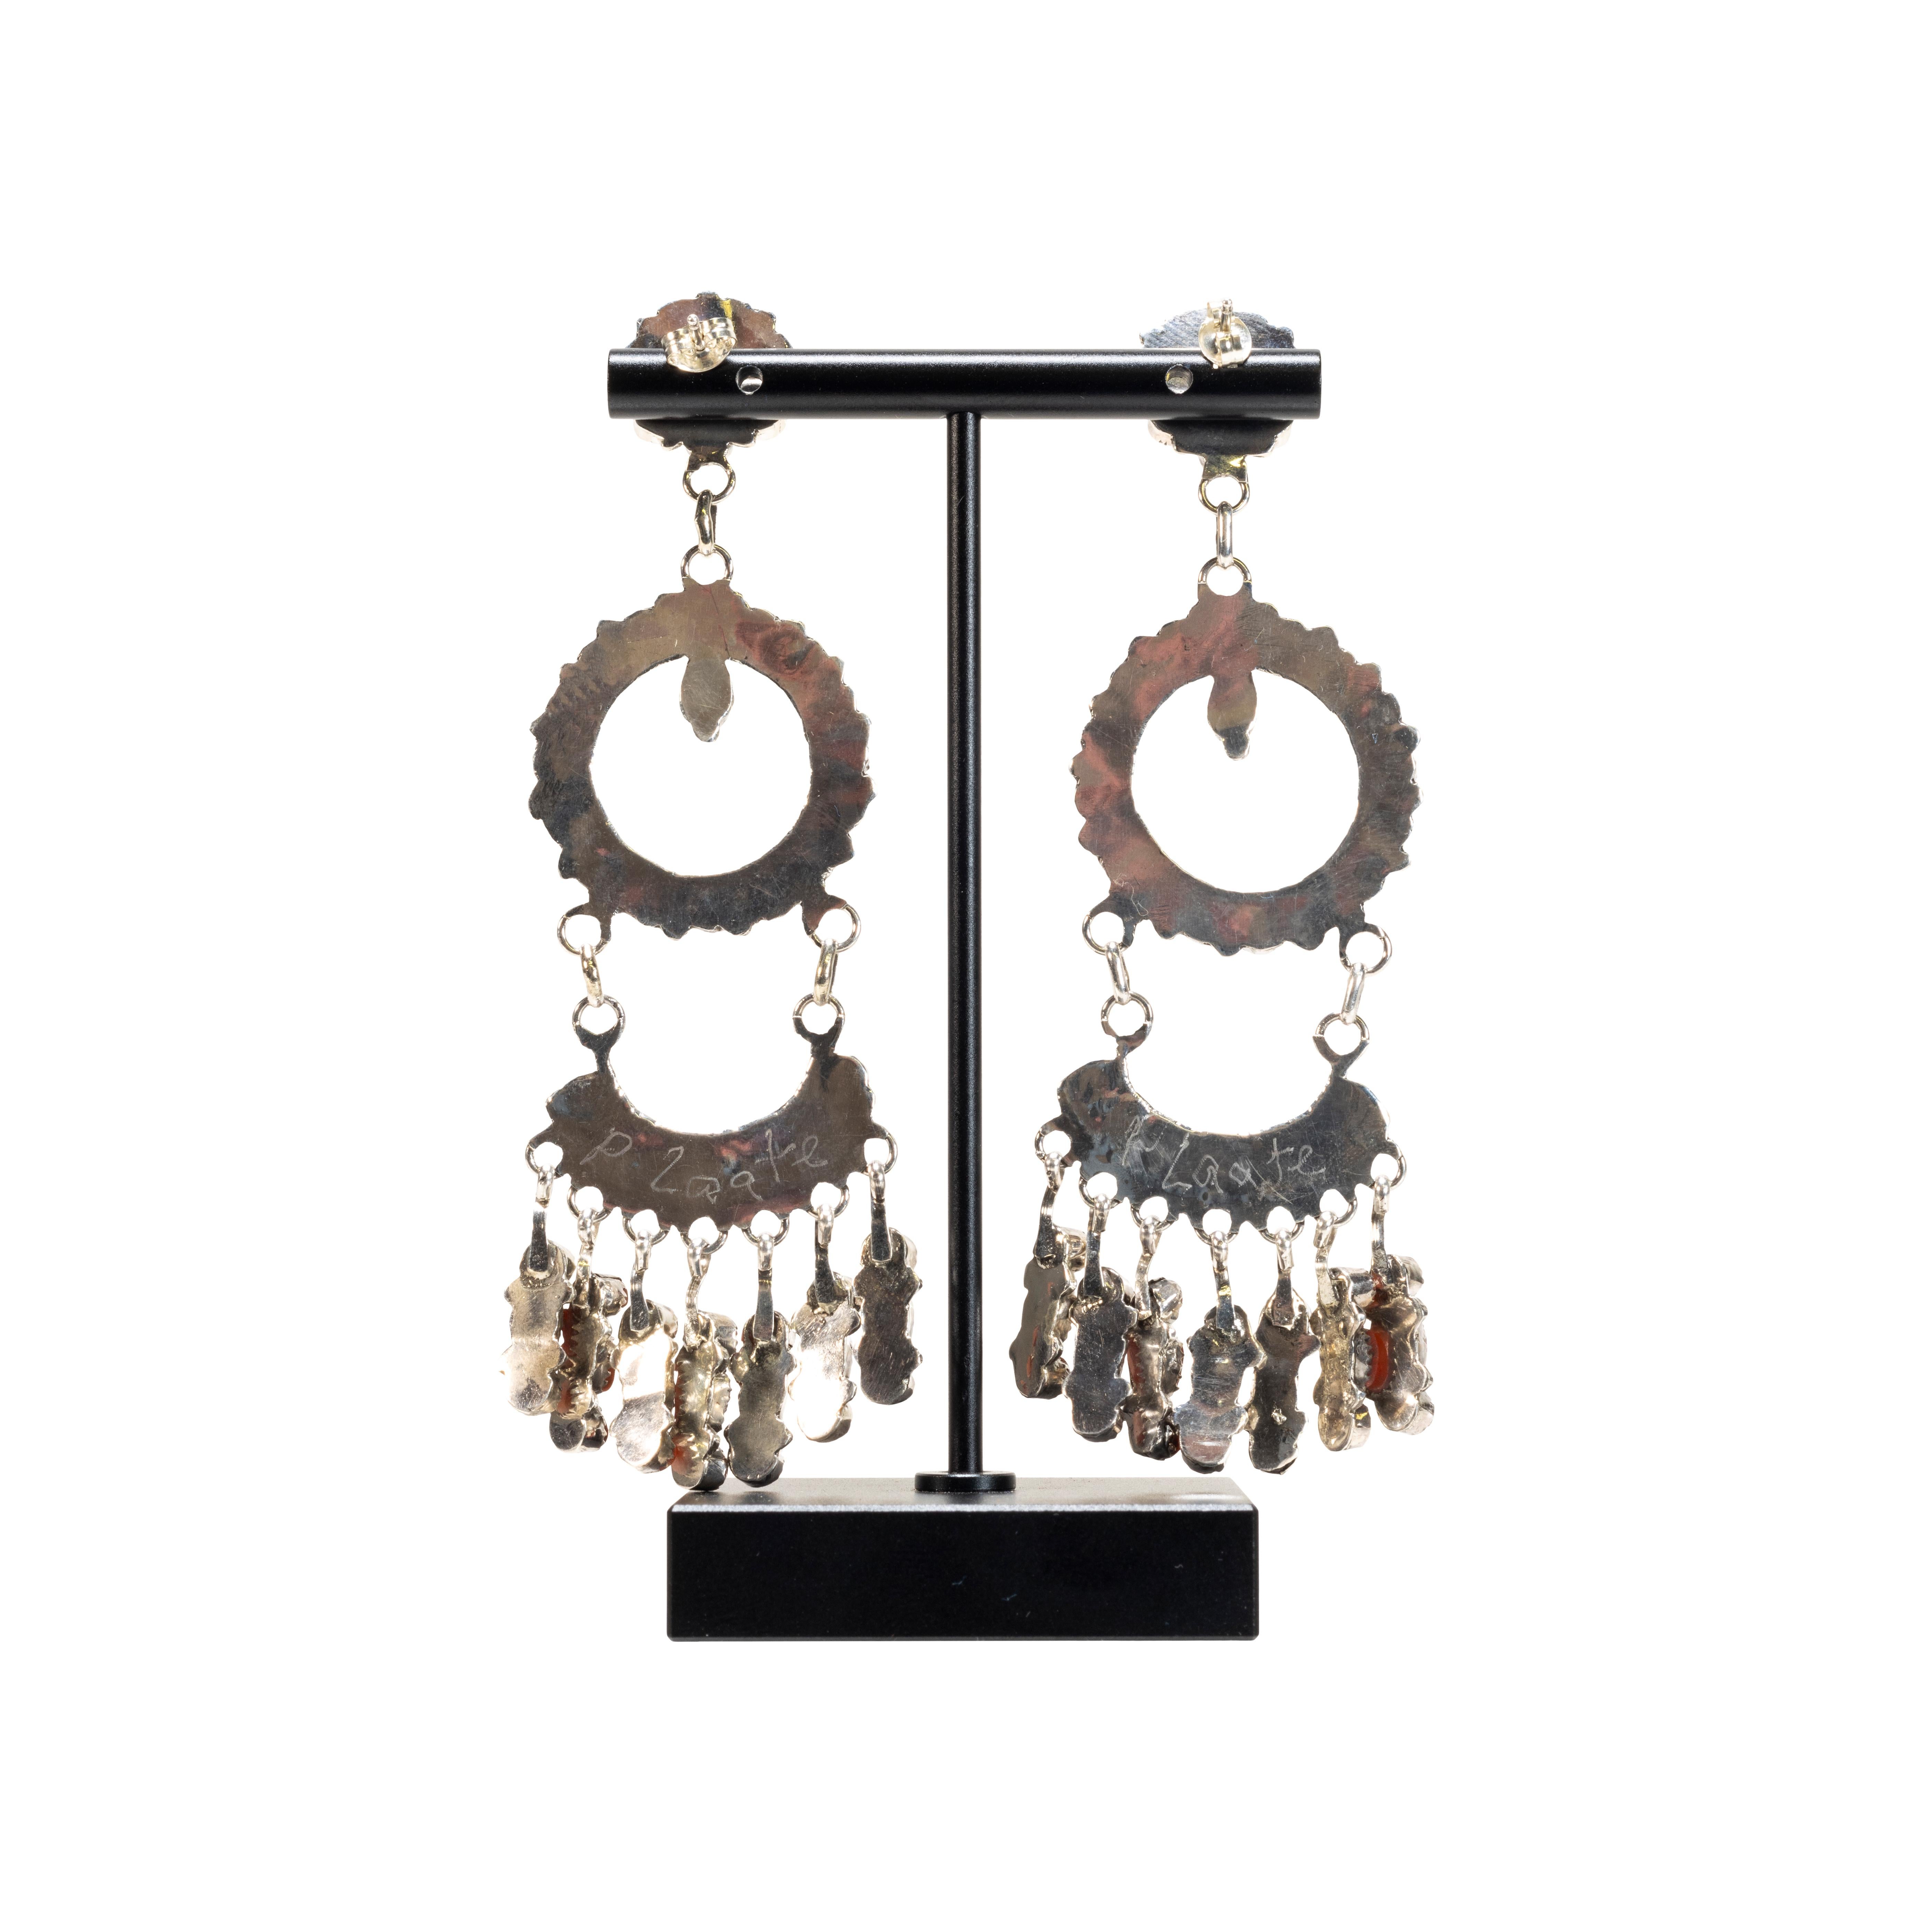 Zuni made natural oxblood coral and sterling silver chandelier earrings by artist Phyllis Laate. Each earring has 53 small coral cabochons hanging in layers that move gracefully. Hallmarked on the back. Post backs.

PERIOD: Contemporary
ORIGIN: